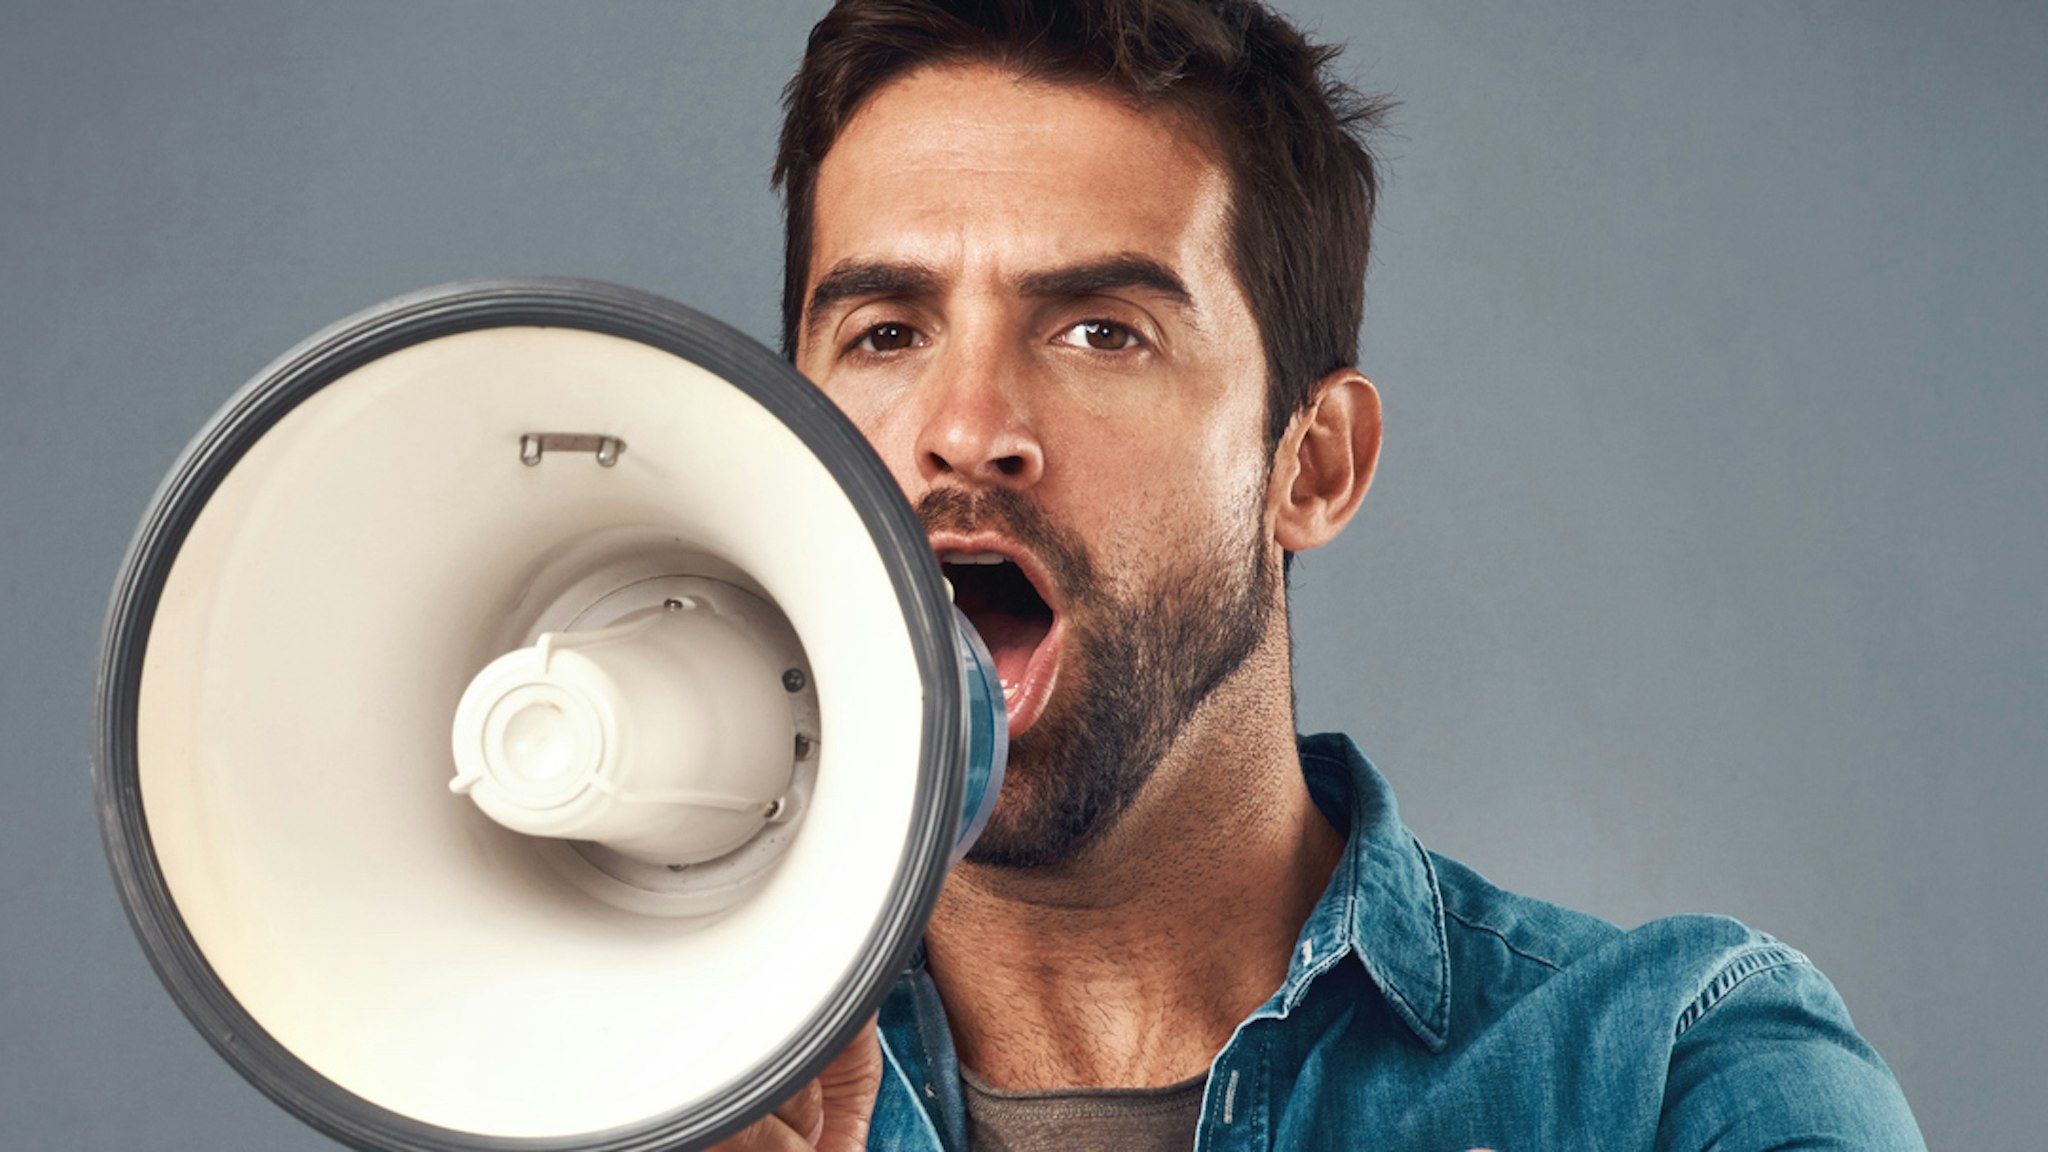 Studio shot of a handsome young man using a megaphone against a grey background